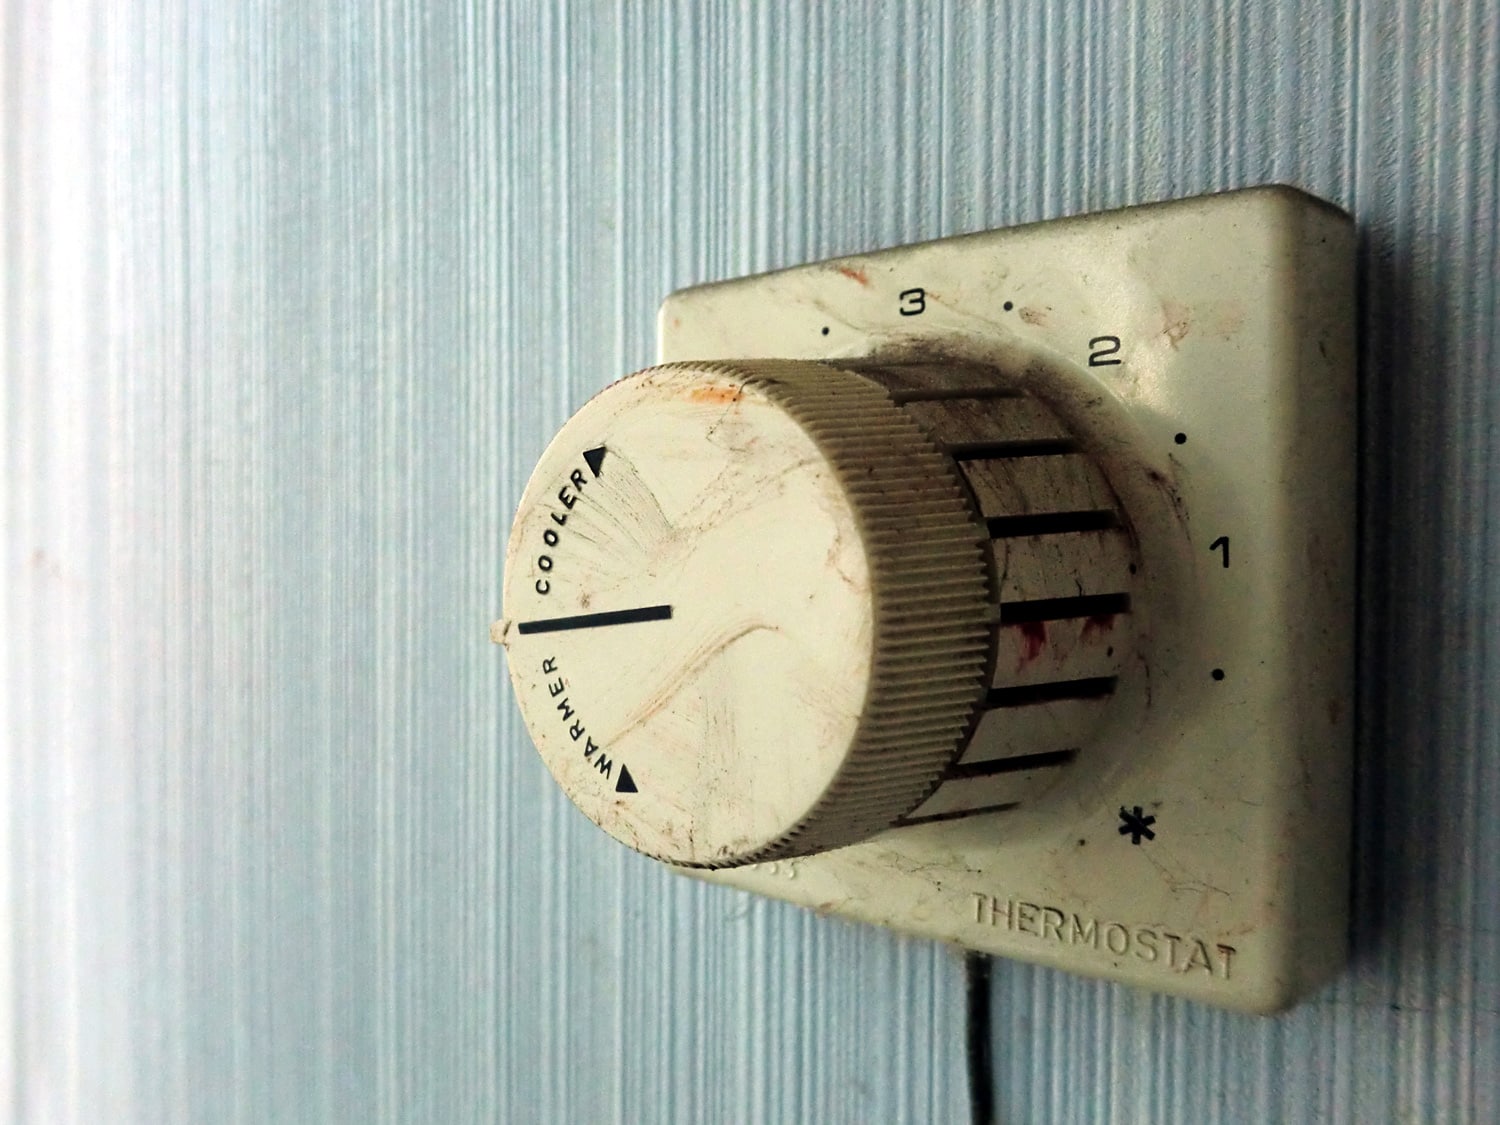 Vintage old grimy thermostat control on wall macro